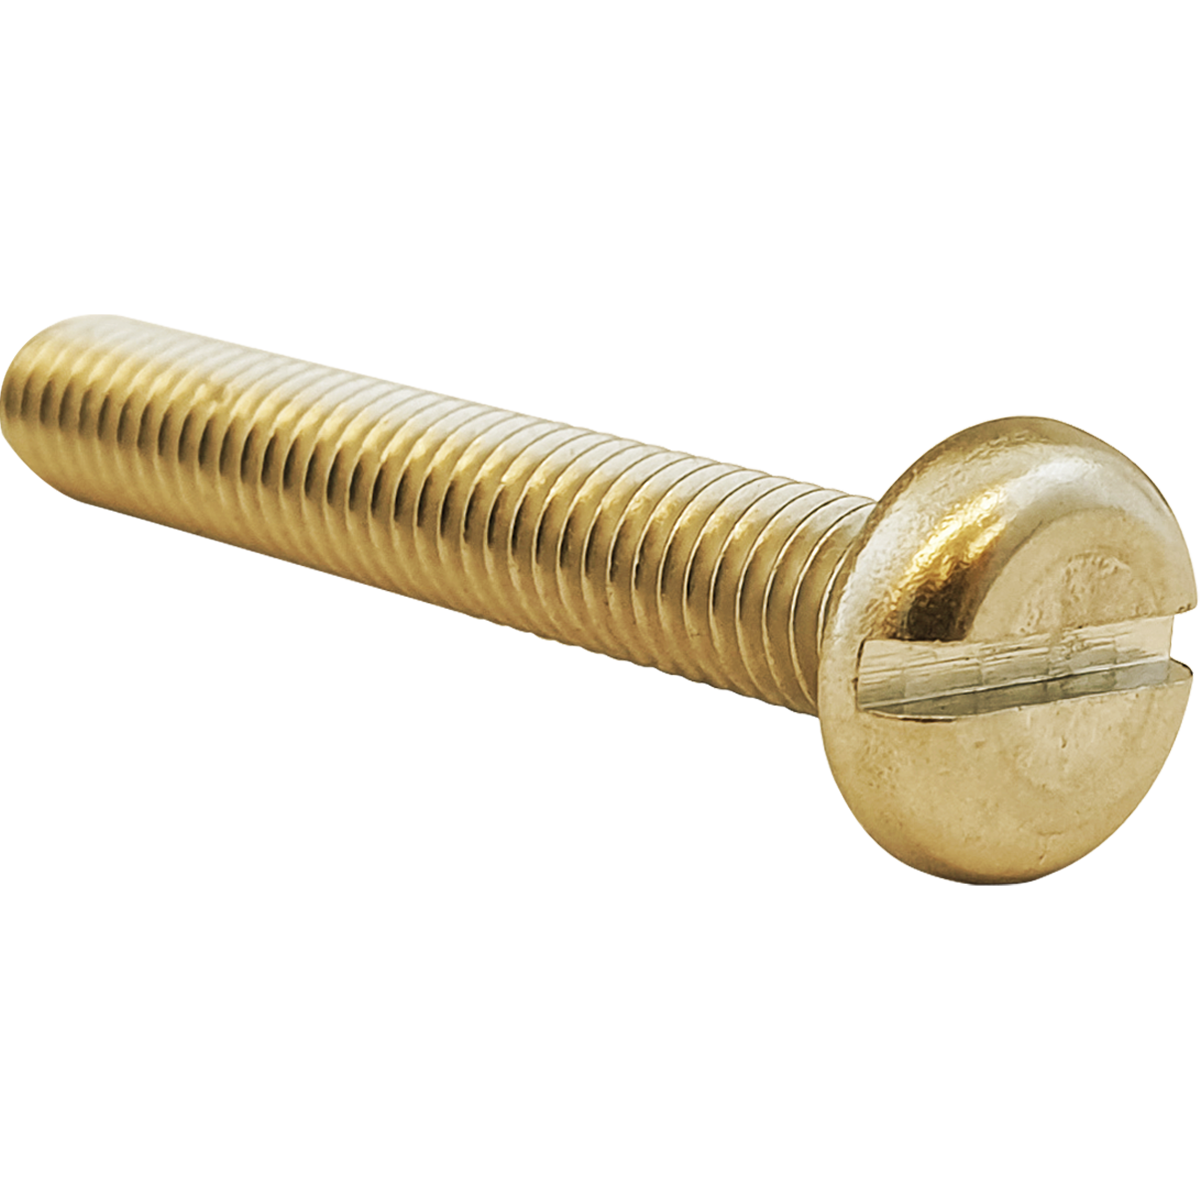 Solid brass machine screws with a slotted pan head